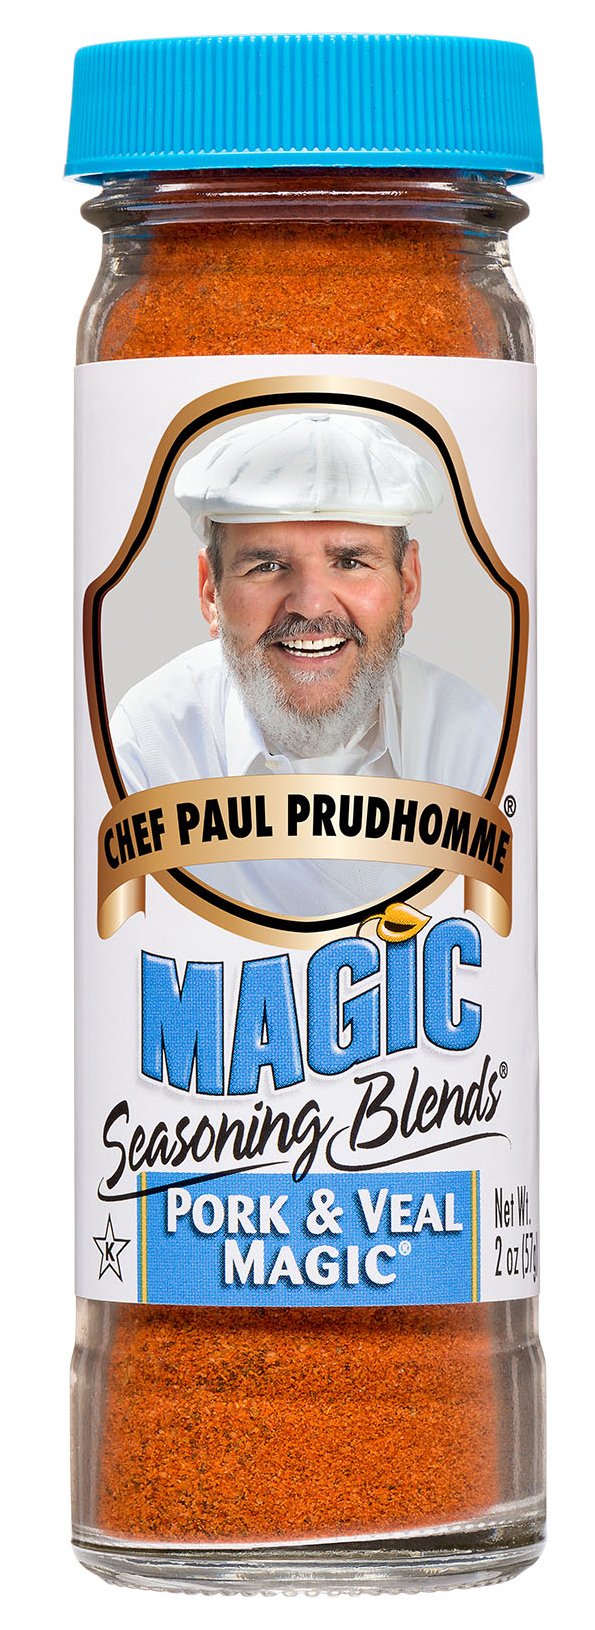 Chef Paul Prudhomme's Meat Magic Seasoning Blends